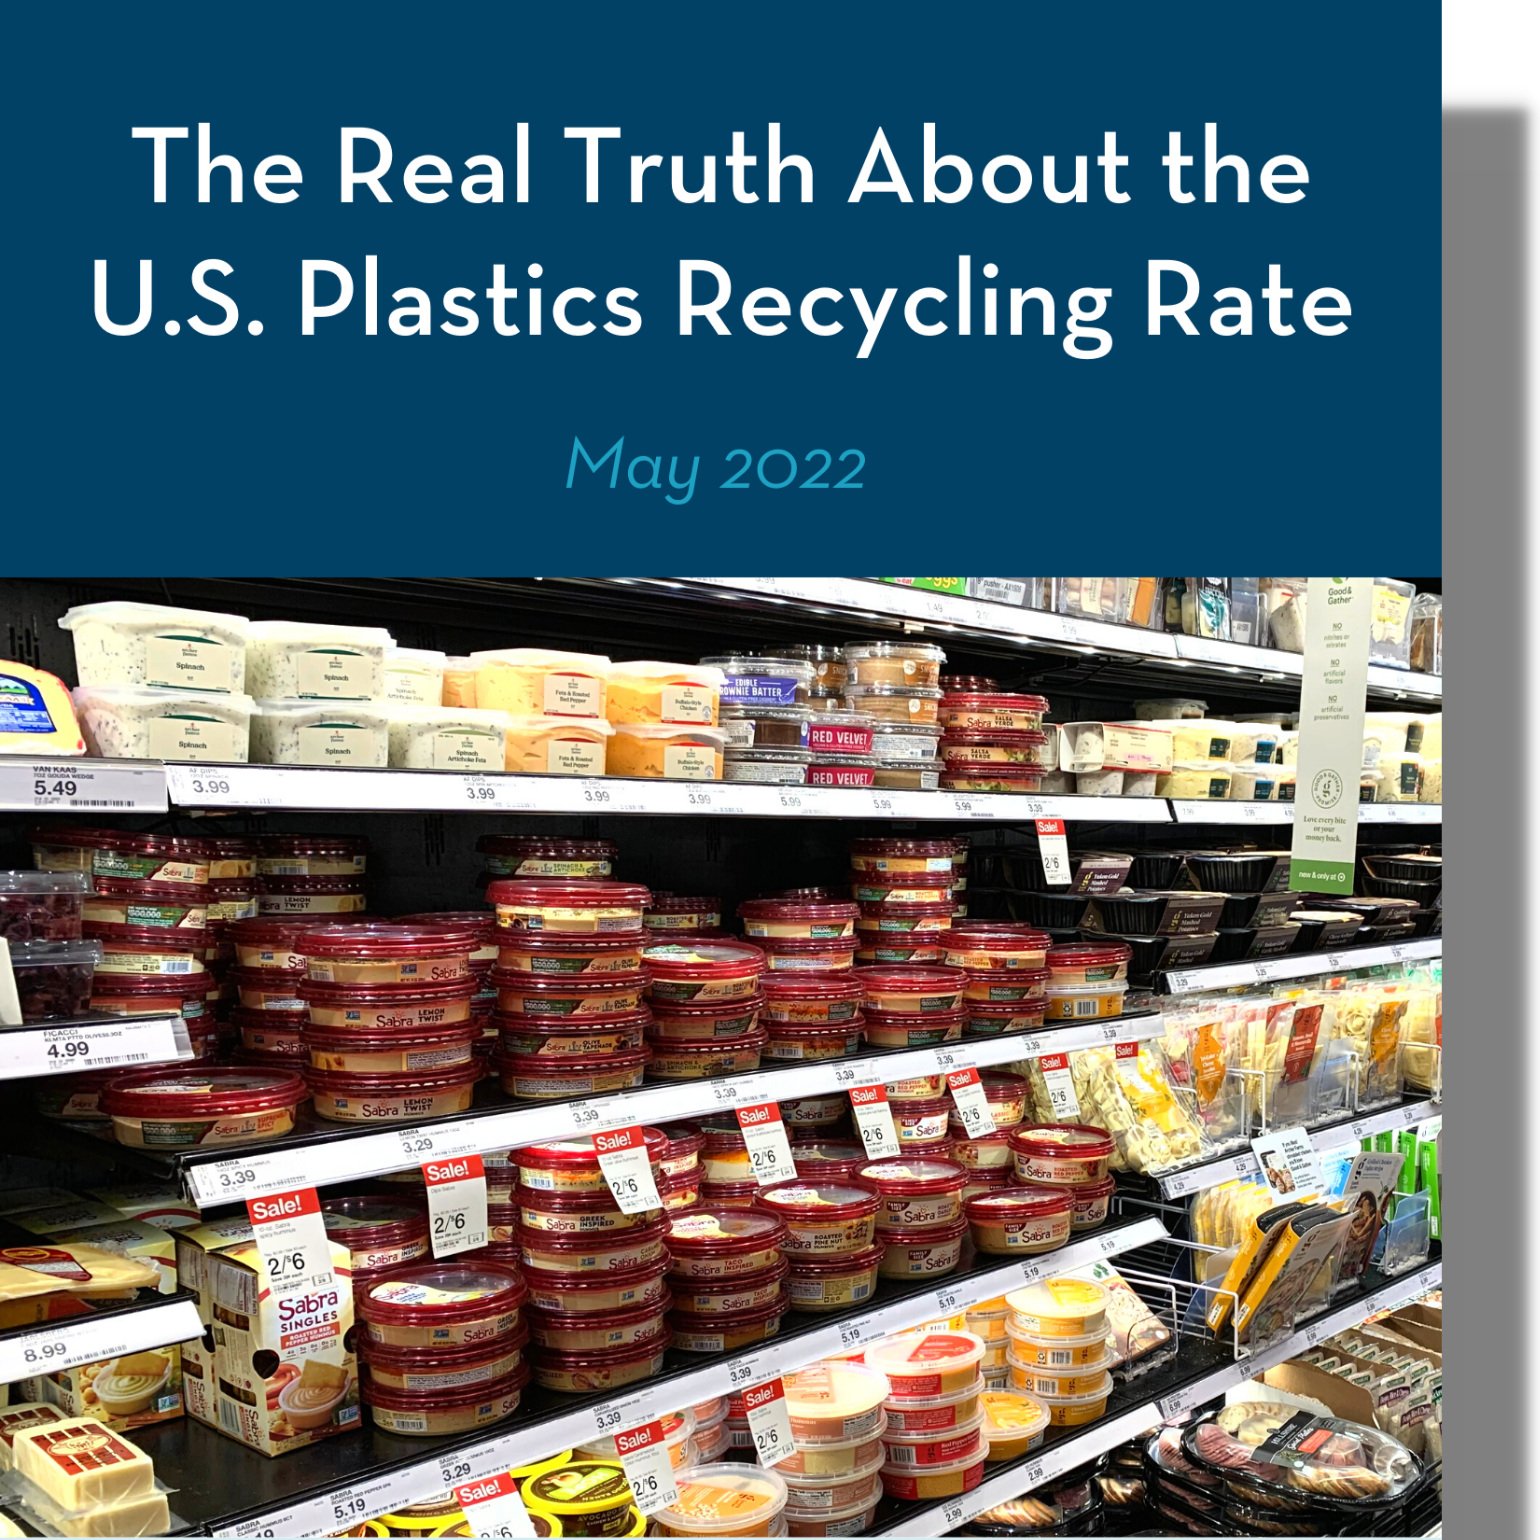 The Real Truth About The U.S. Plastics Recycling Rate